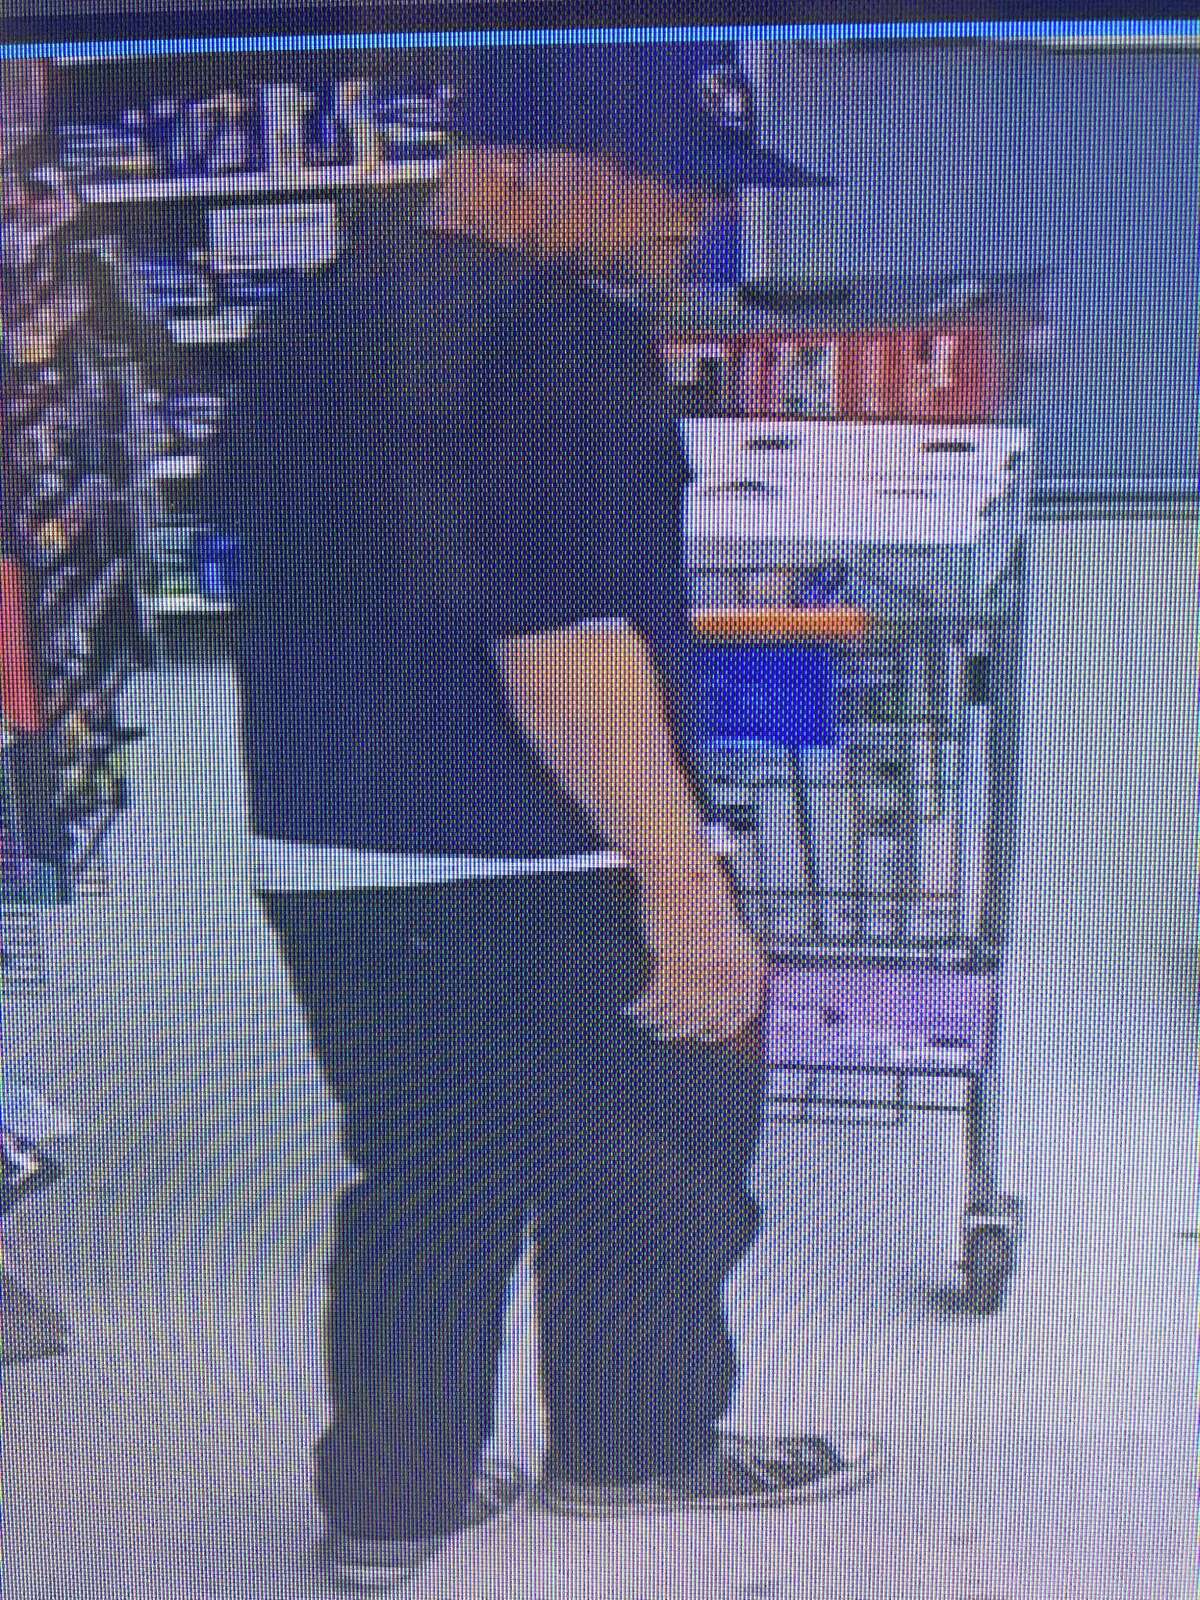 Hamden police are asking for the public's help identifying this person who allegedly stole $3,000 worth of merchandise from Wal-Mart in Hamden on May 1, 2018.